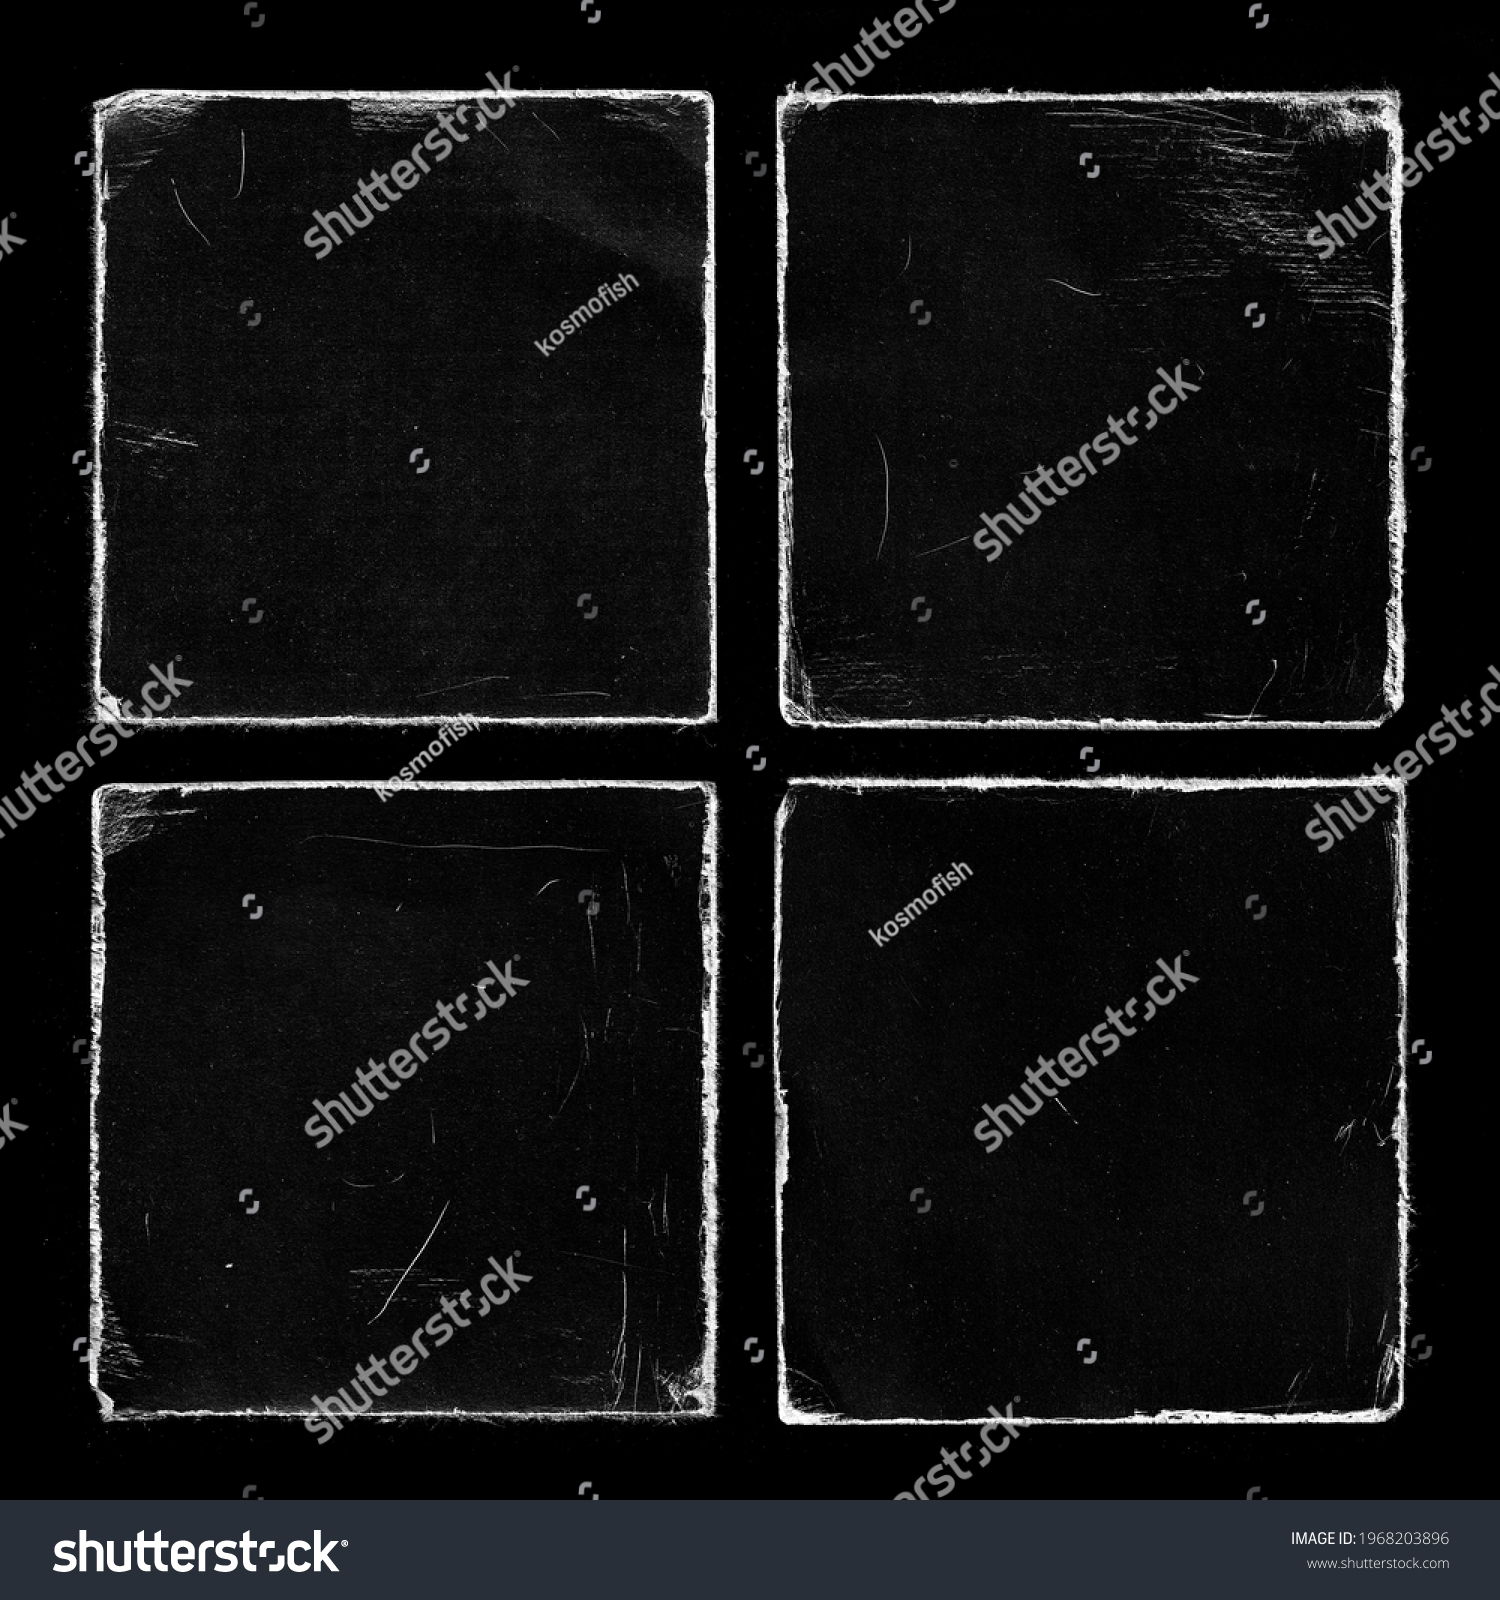 Set of Four Old Black Square Vinyl CD Record Cover Package Envelope Template Mock Up. Empty Damaged Grunge Aged Photo Scratched Shabby Paper Cardboard Overlay Texture.  #1968203896